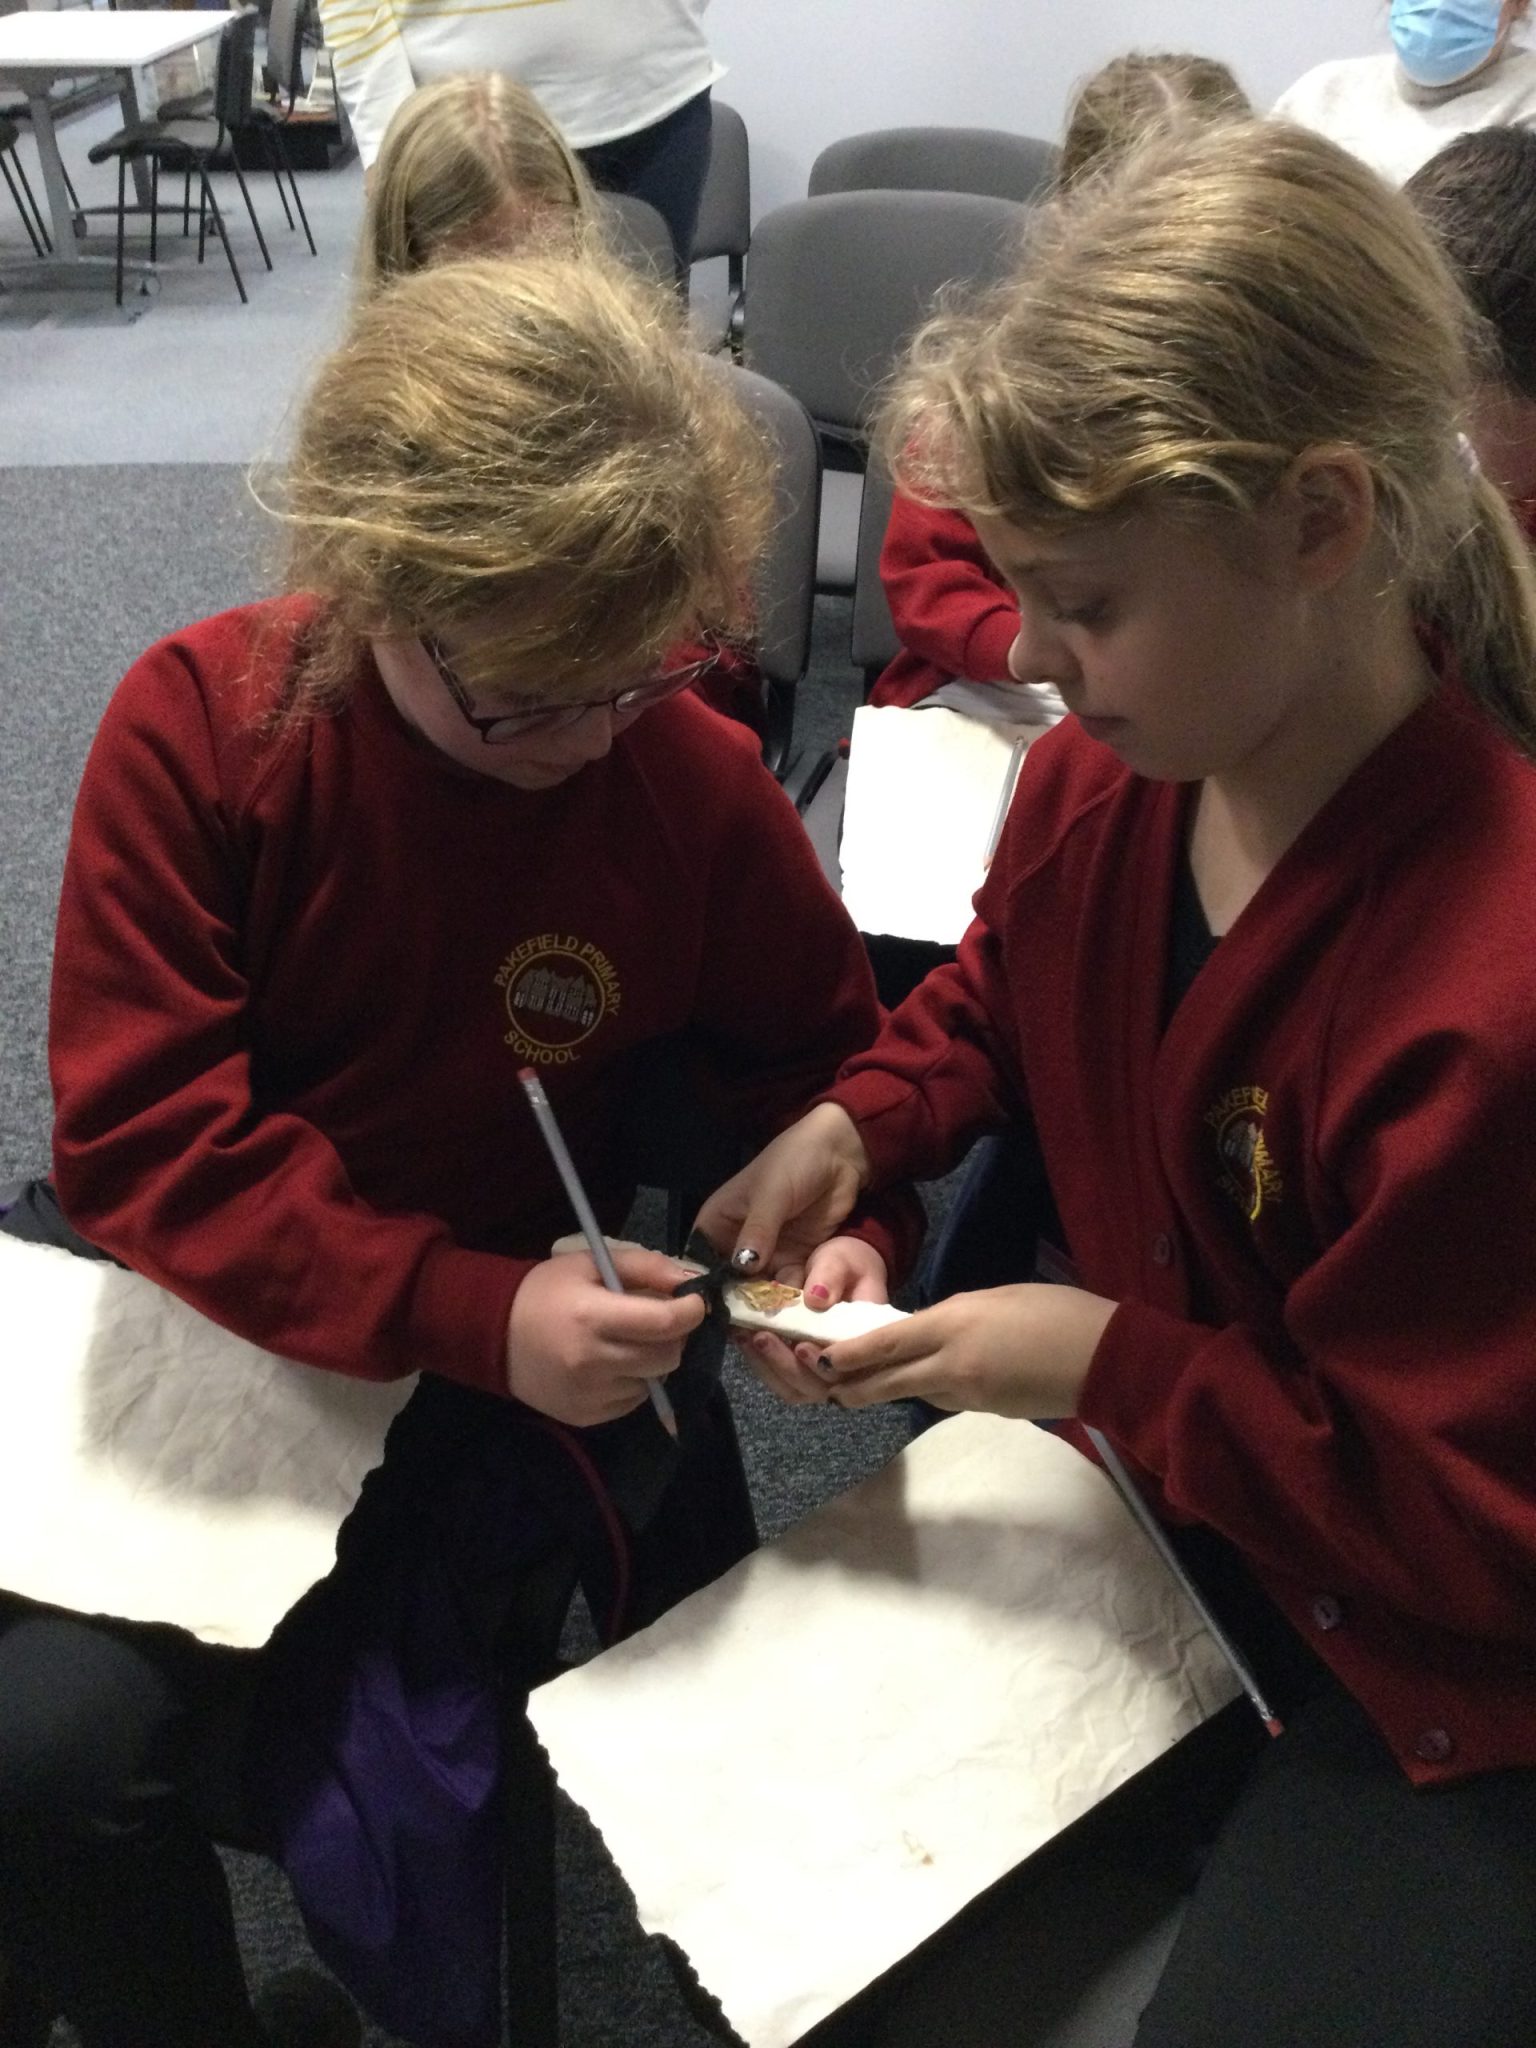 Two young girls opening an old-fashioned scroll